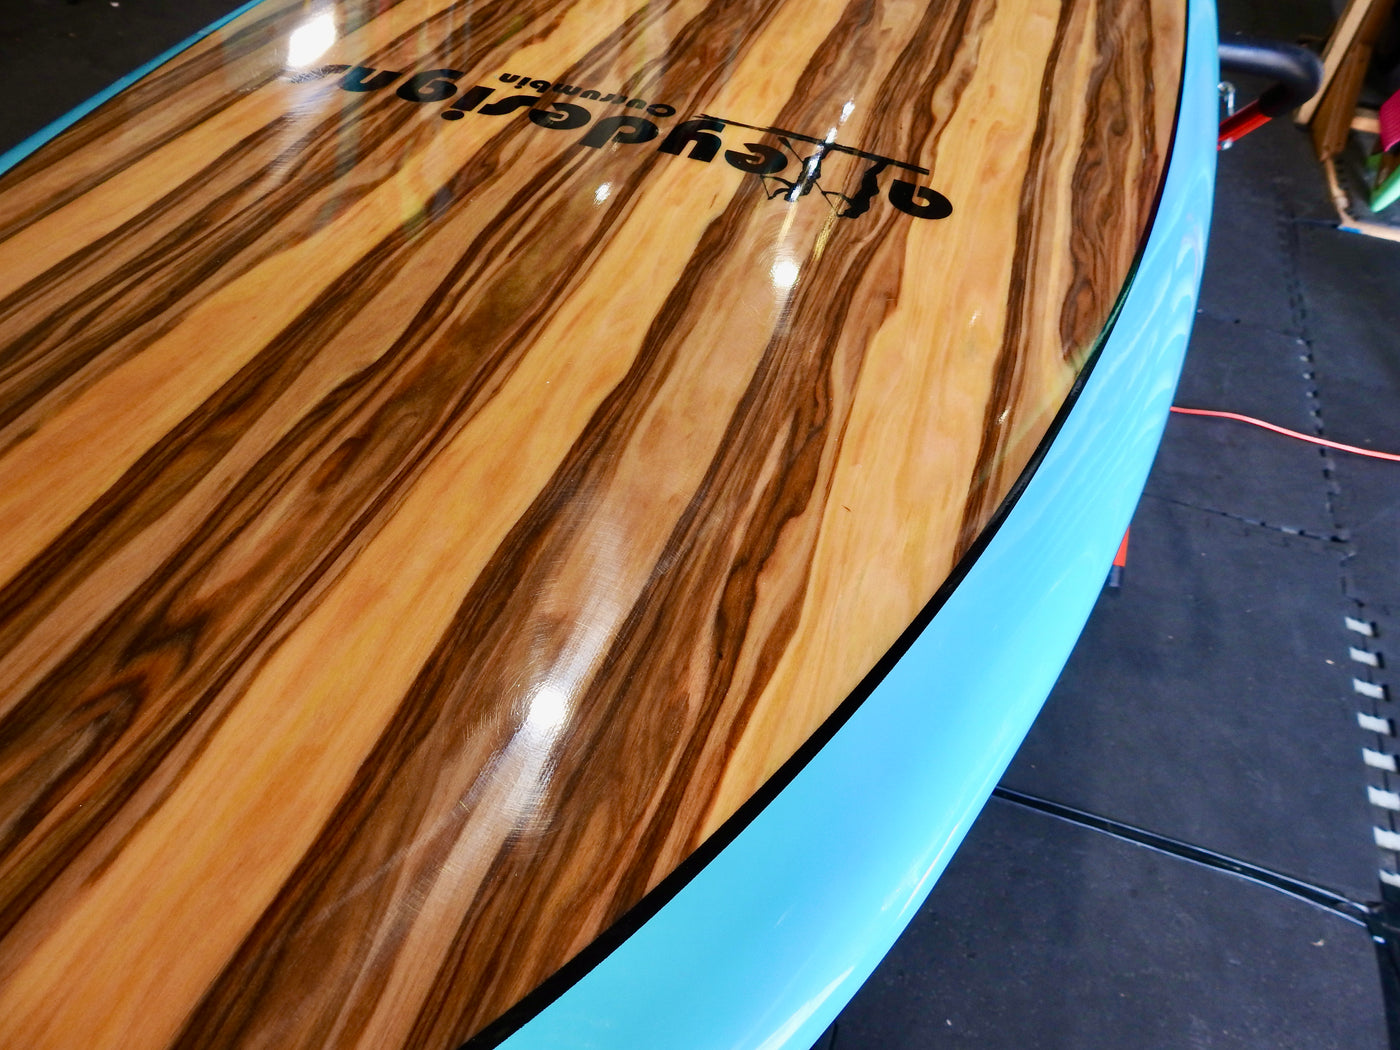 10'6" x 32" Timber Performance Teal Rails Alleydesigns 11kg SUP - Alleydesigns  Pty Ltd                                             ABN: 44165571264